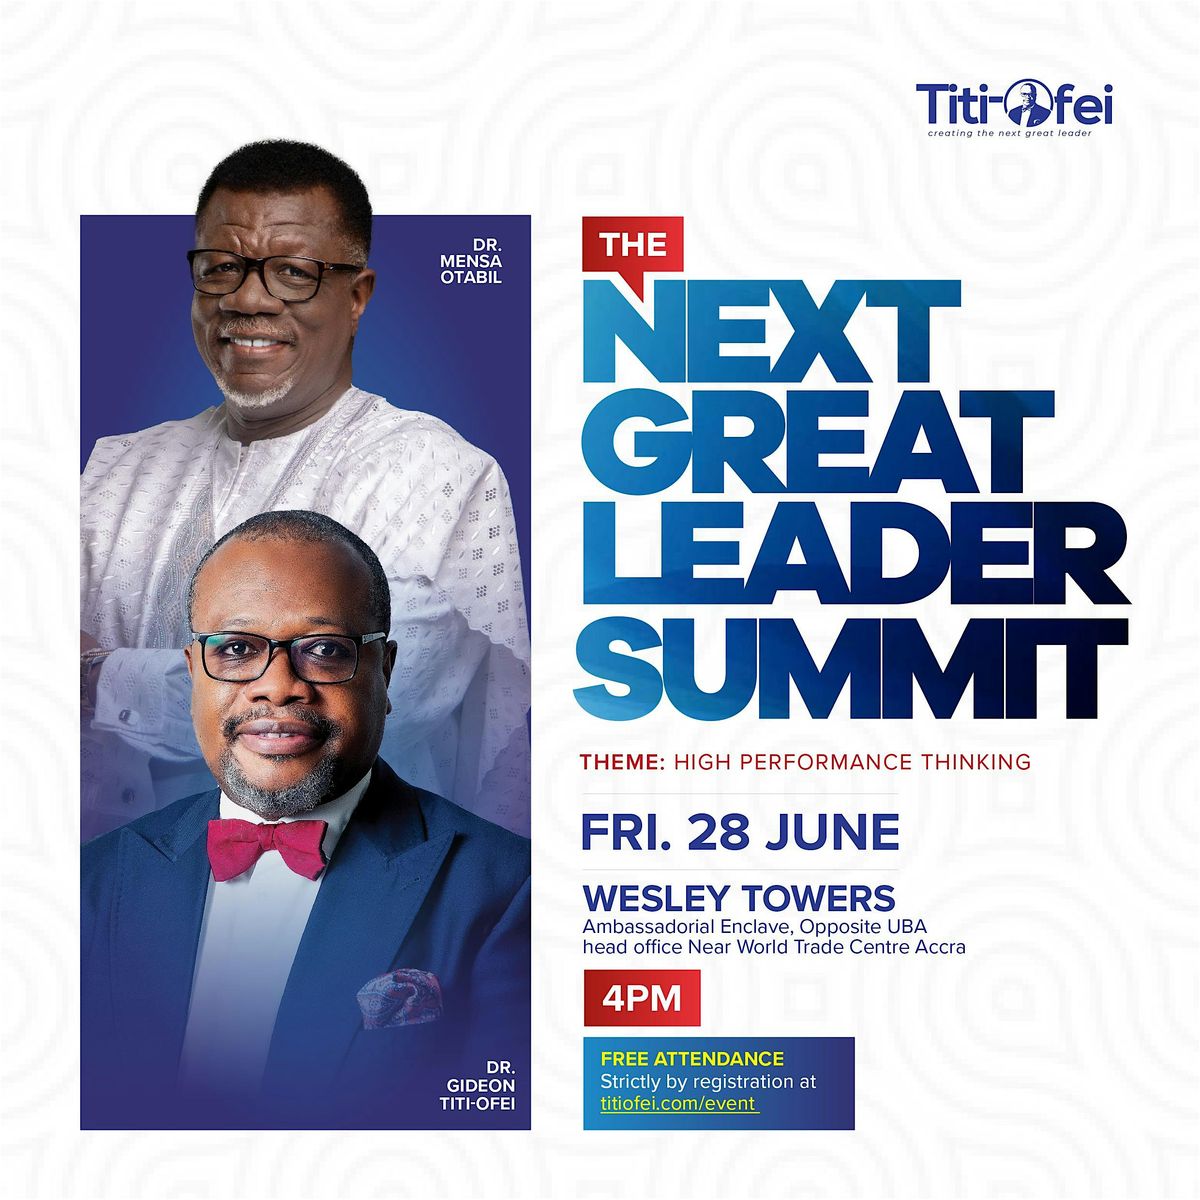 The Next Great Leader Summit